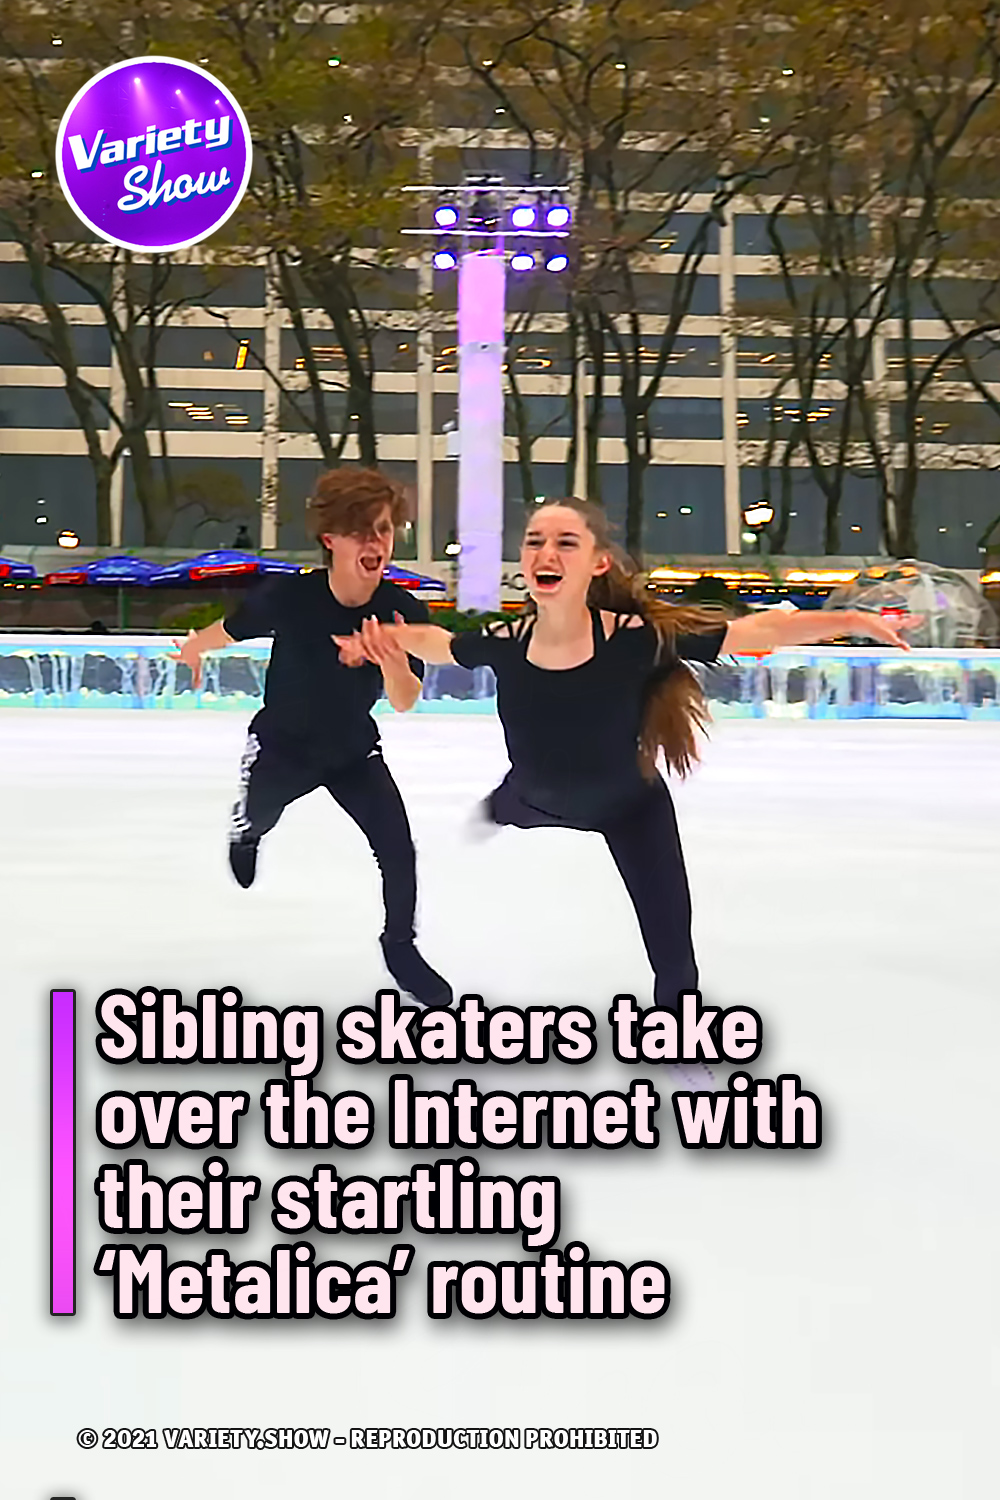 Sibling skaters take over the Internet with their startling ‘Metalica’ routine